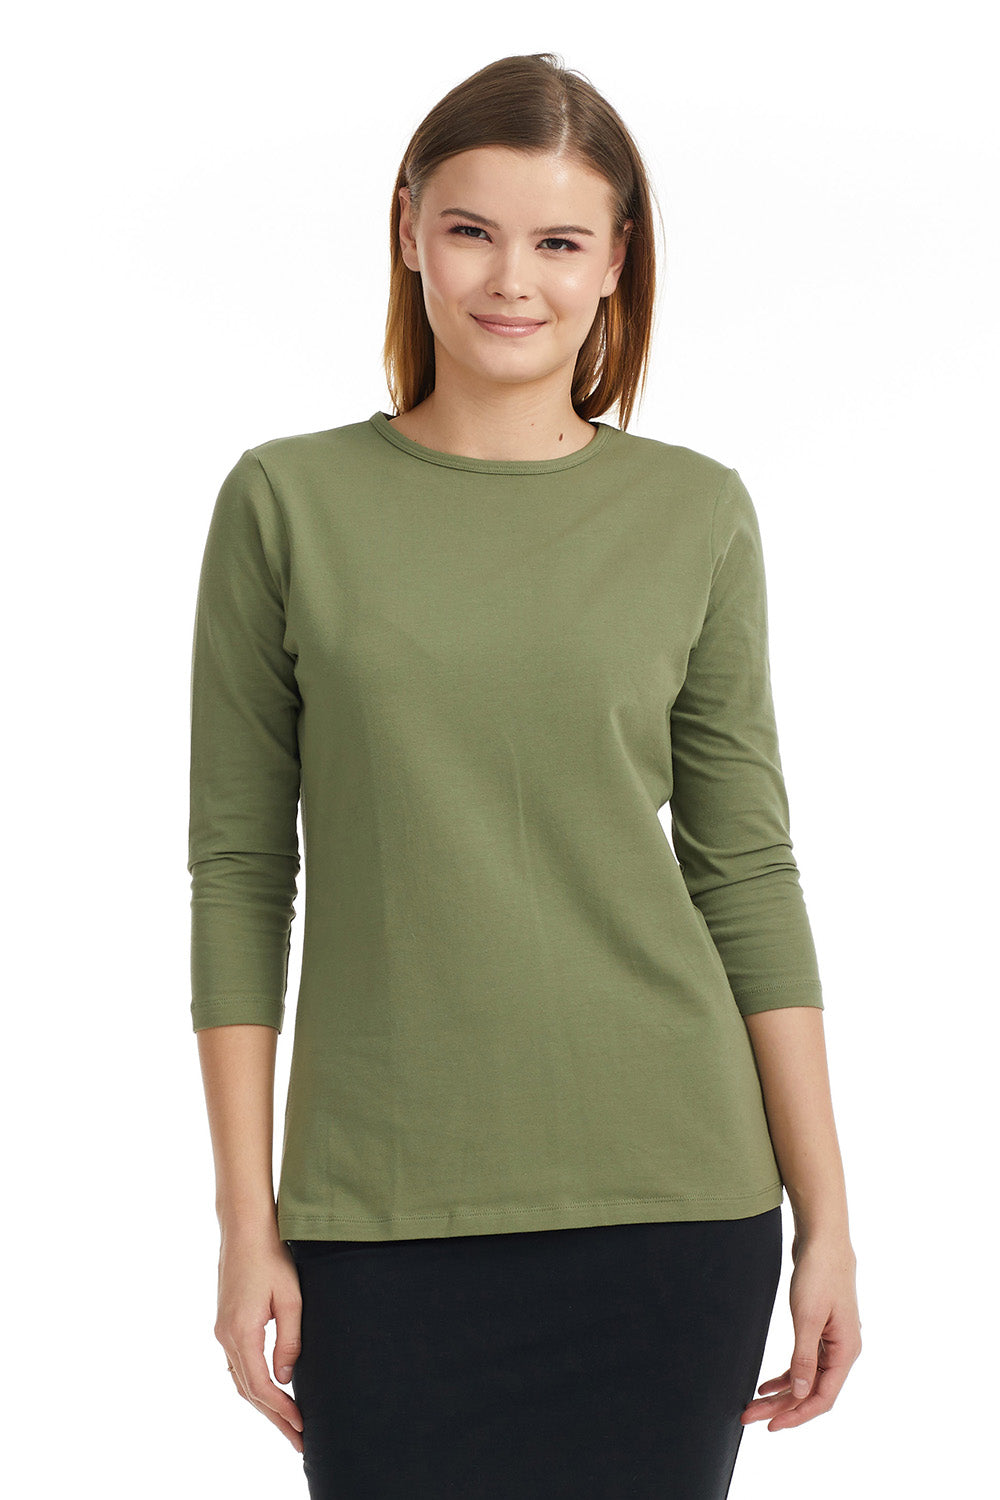 Esteez ¾ Sleeve Cotton Spandex RELAXED FIT Layering Shirt for WOMEN